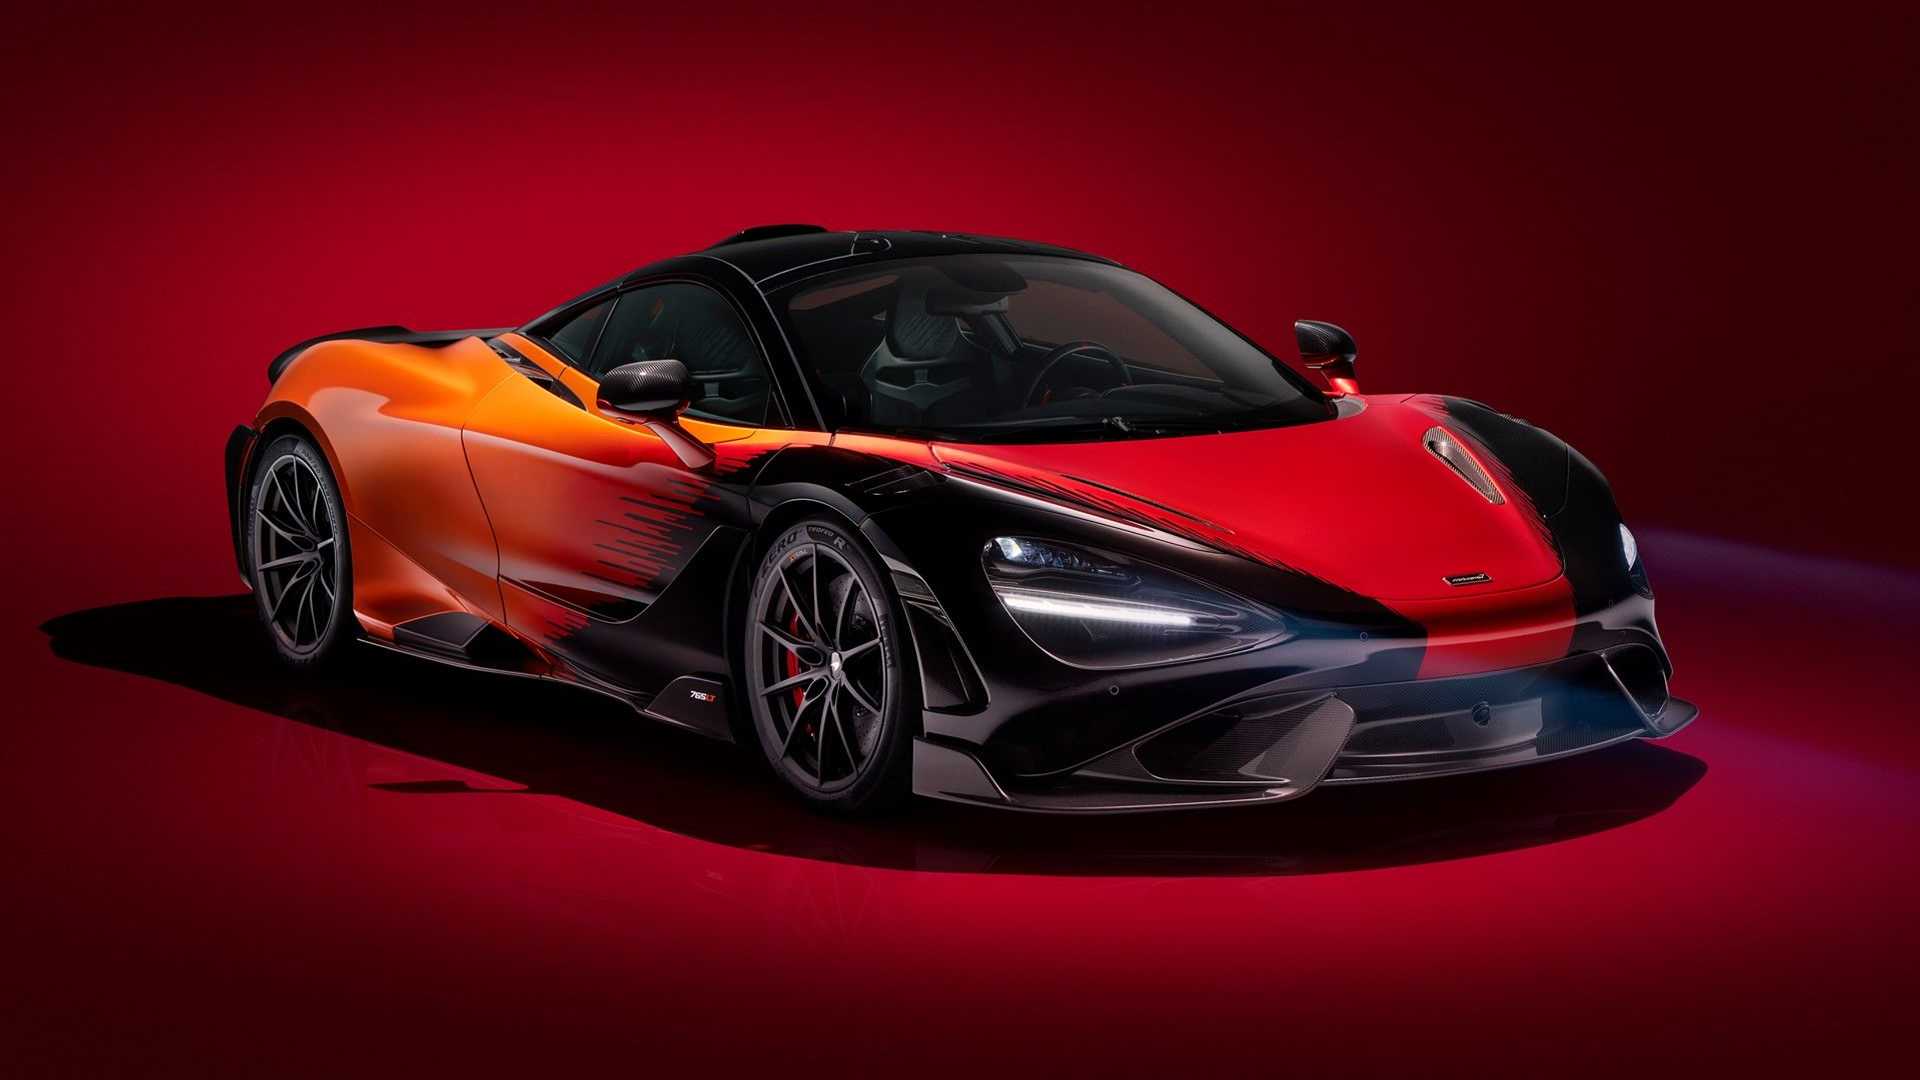 MSO shows off stunning Strata Theme for McLaren 765LT supercar